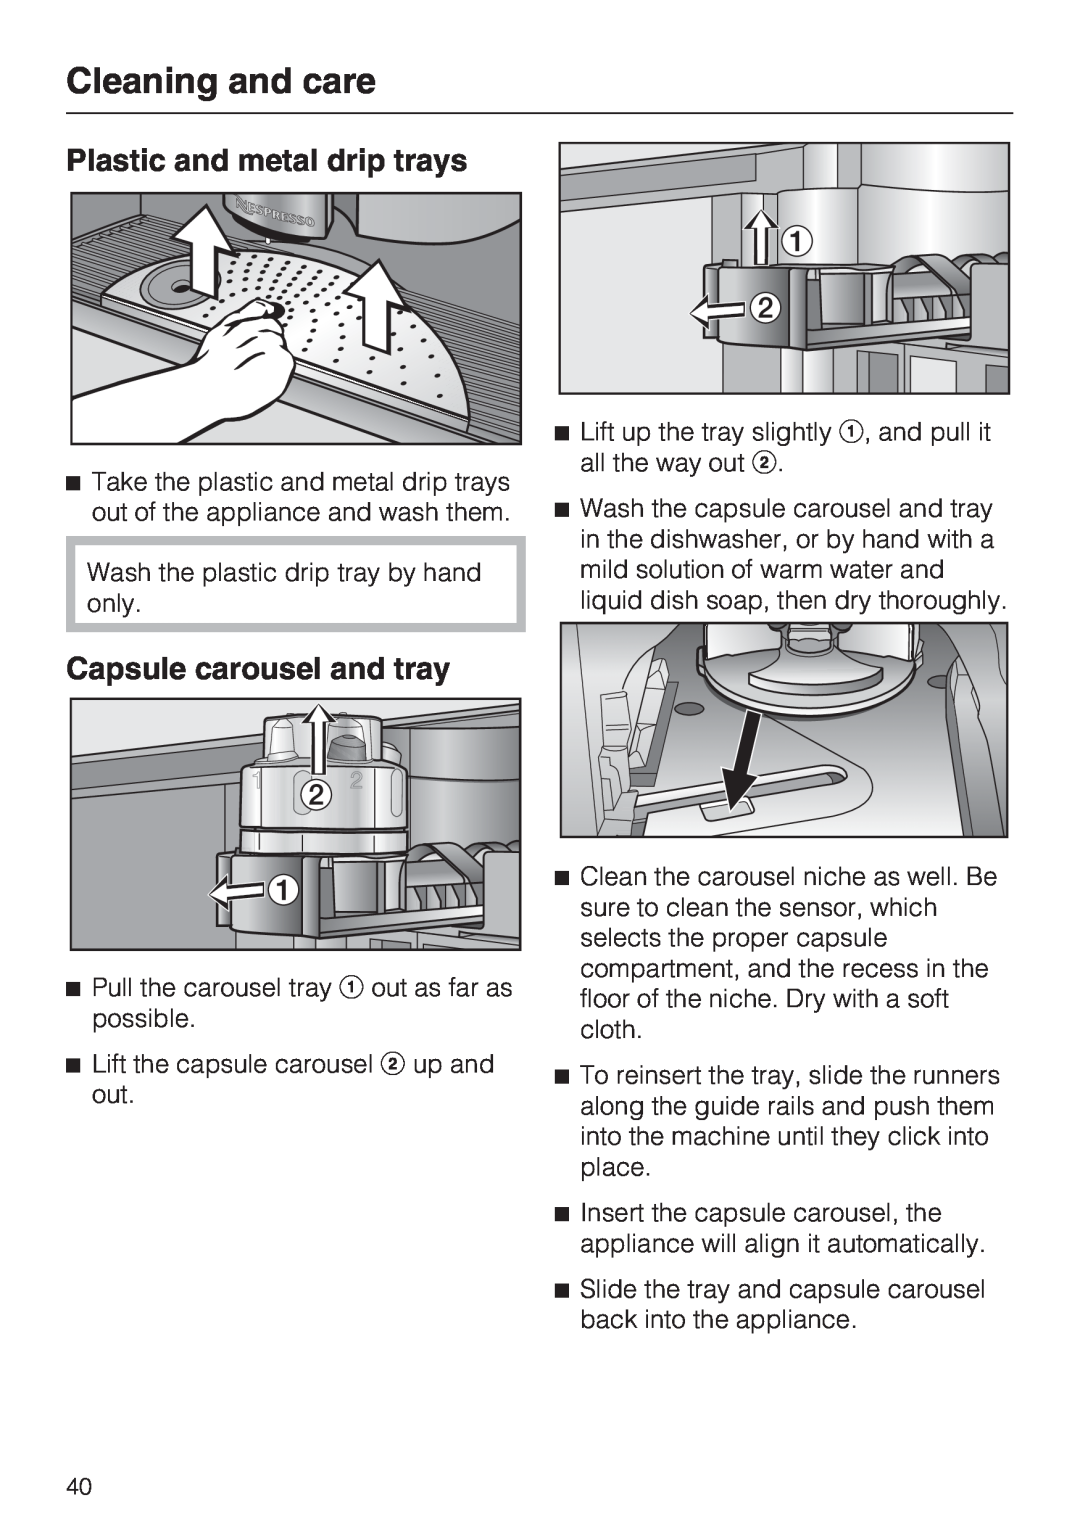 Miele CVA 2652 installation instructions Plastic and metal drip trays, Capsule carousel and tray, Cleaning and care 